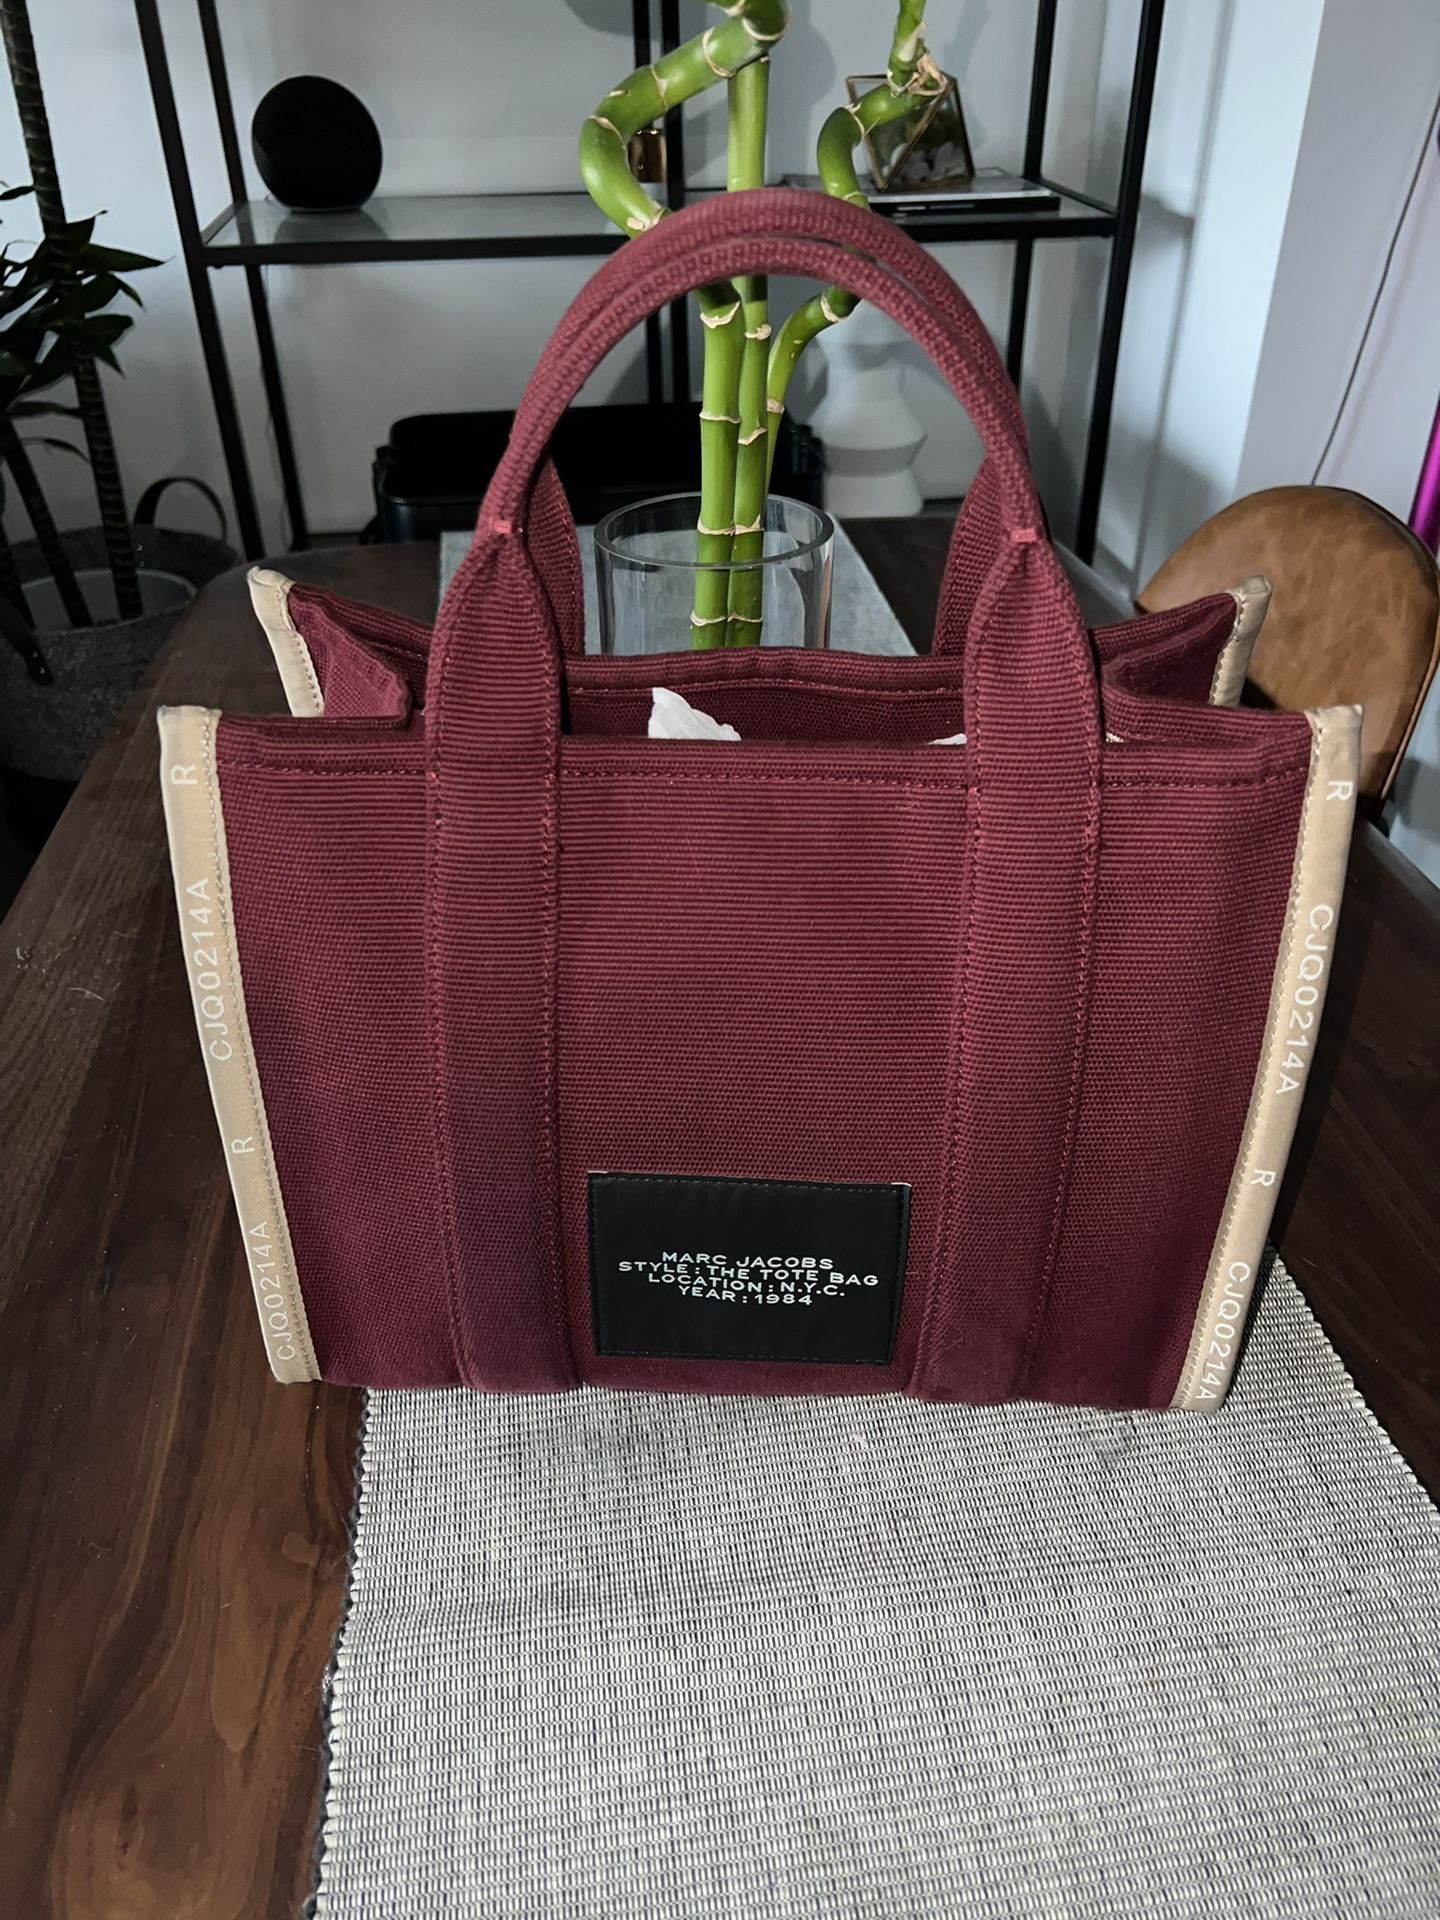 Marc Jacobs Pillow Bag for Sale in Somerset, NJ - OfferUp